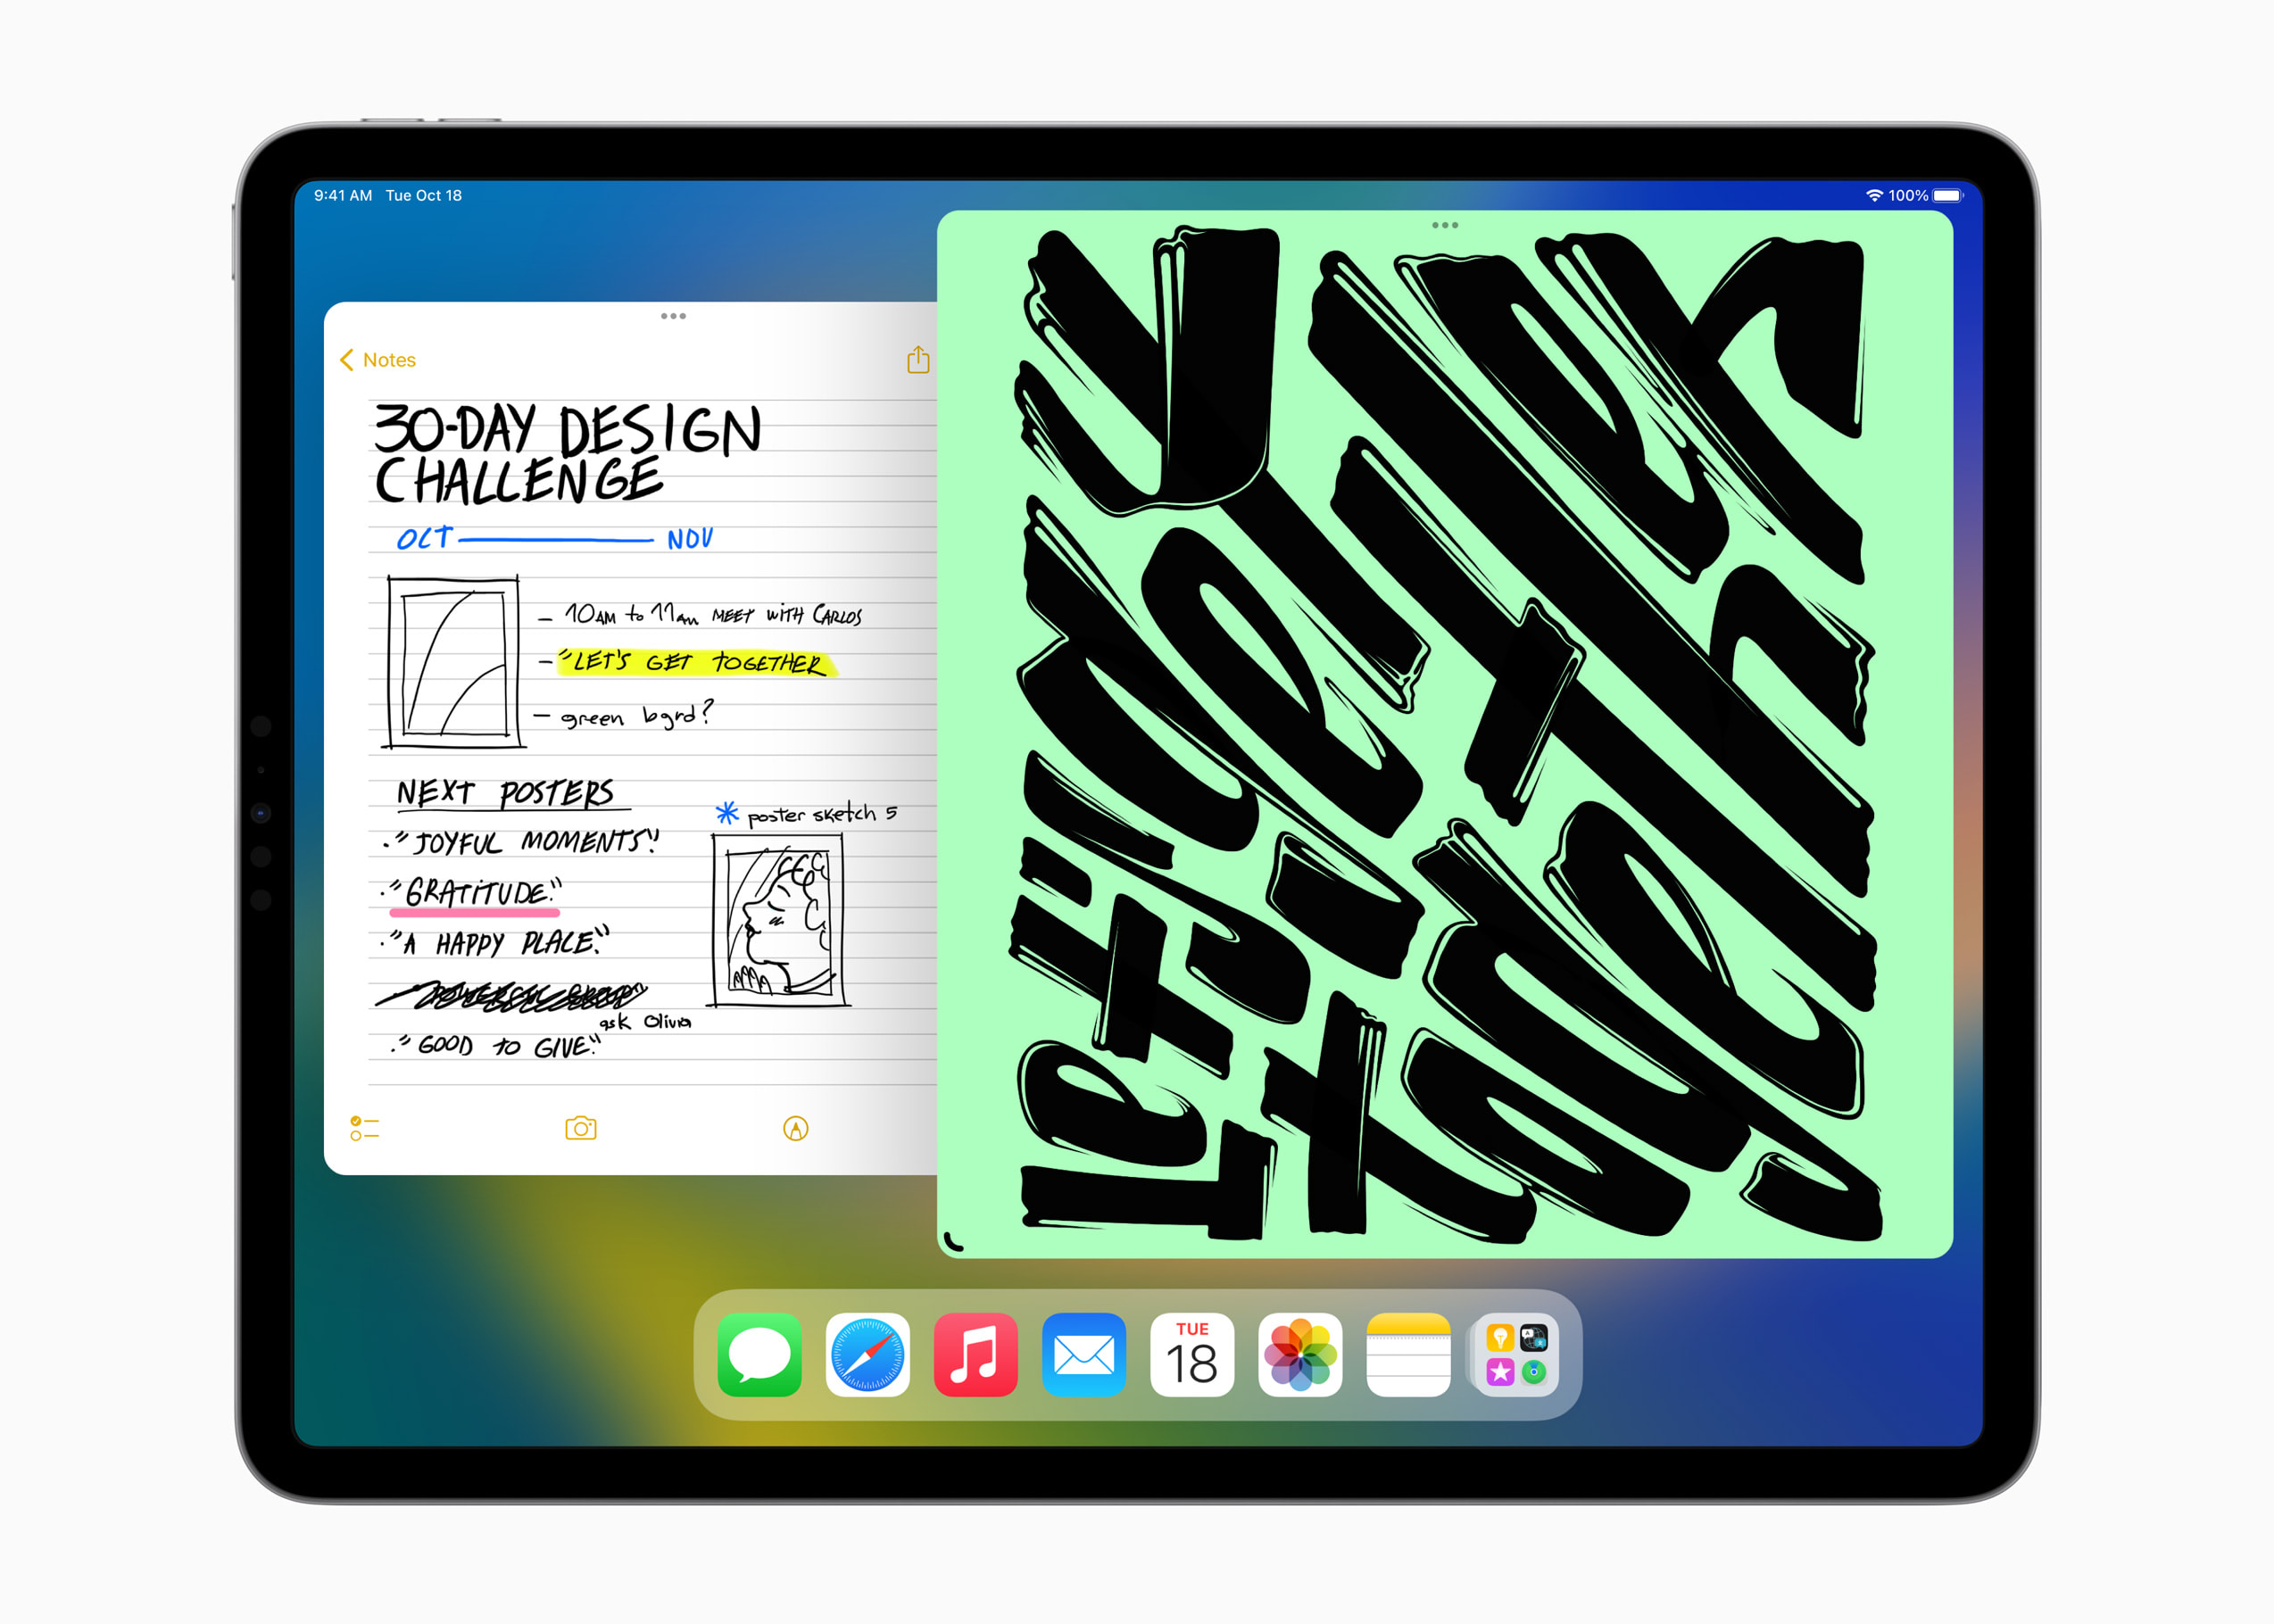 Apple is working on an extra-large iPad, to launch a 16-inch iPad